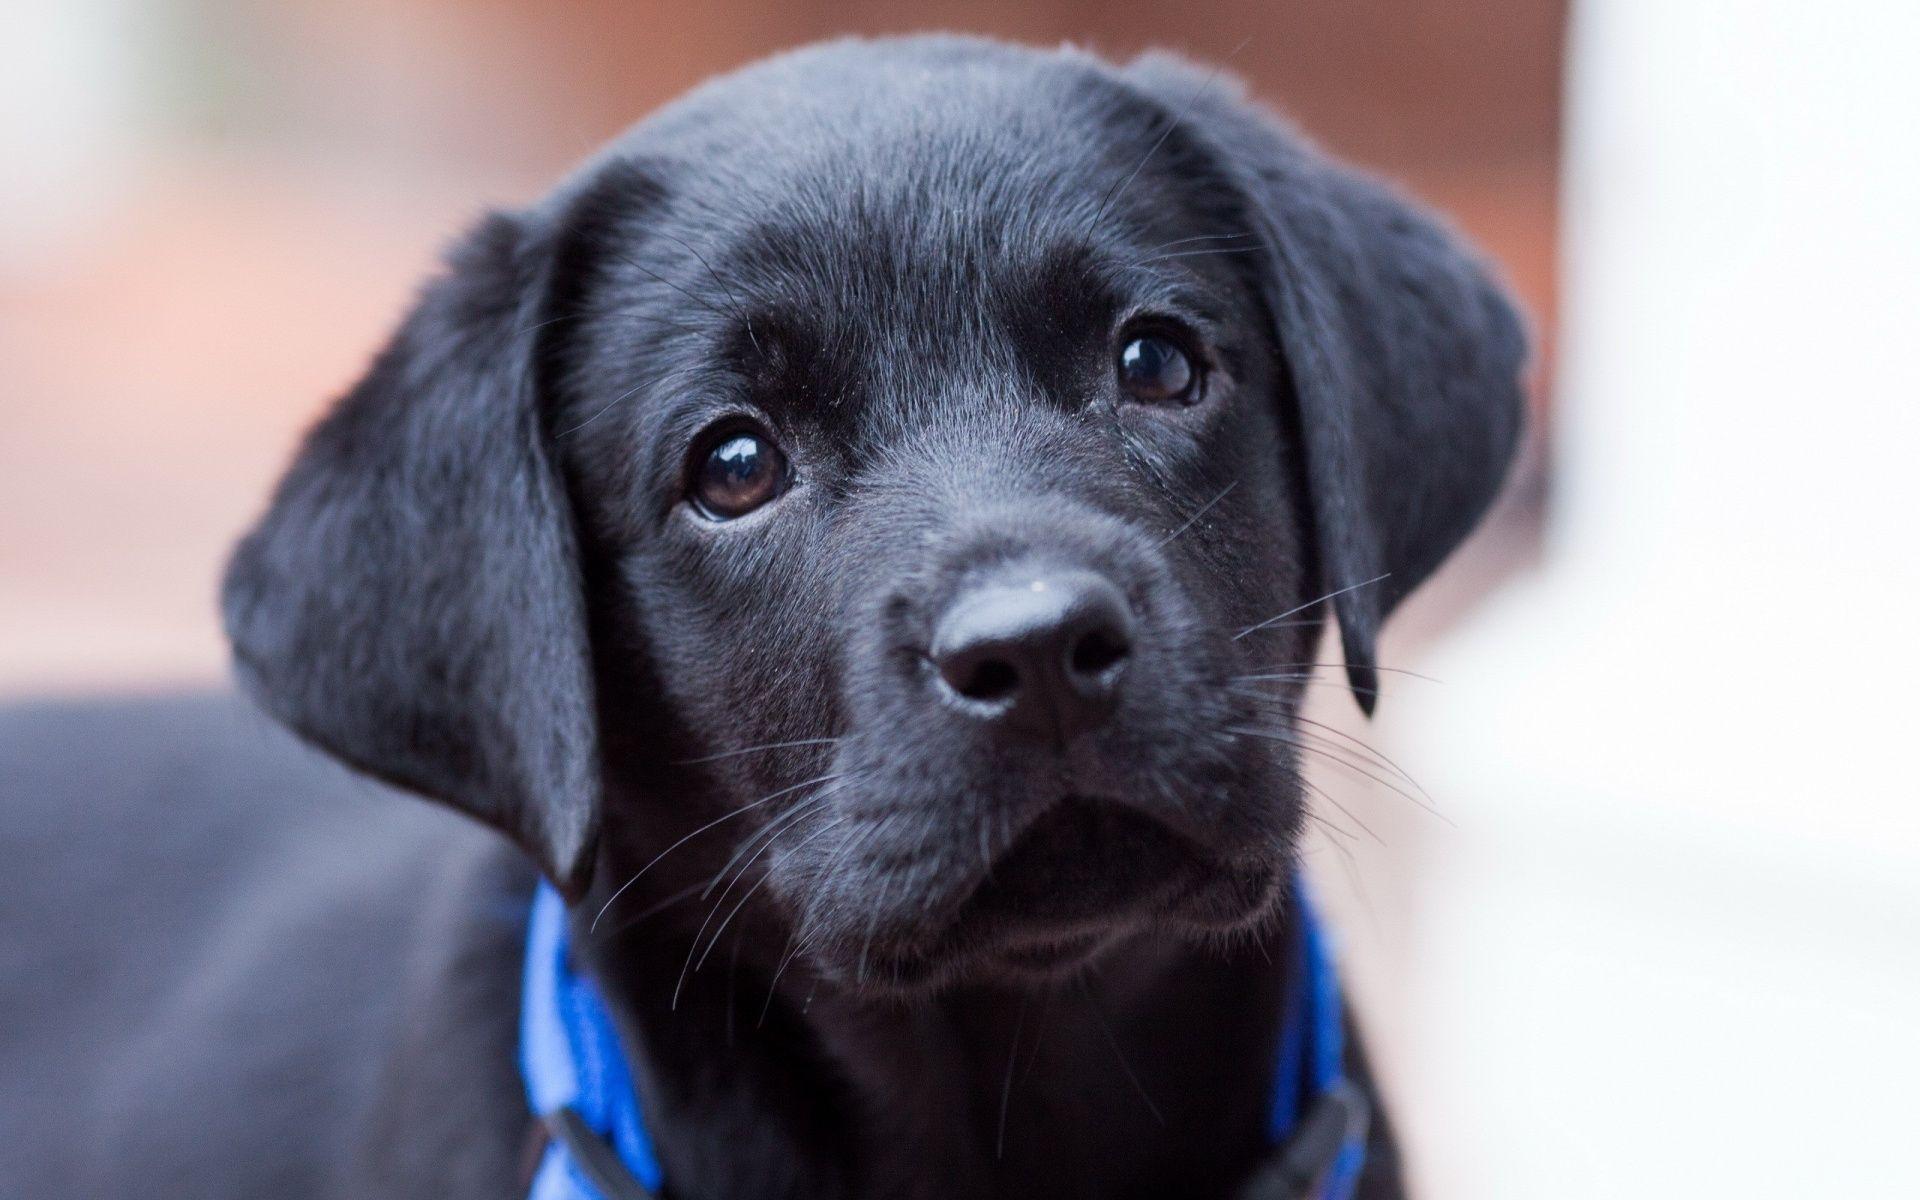 Black Lab Puppy Wallpaper, Black Lab Puppy Wallpaper For Free